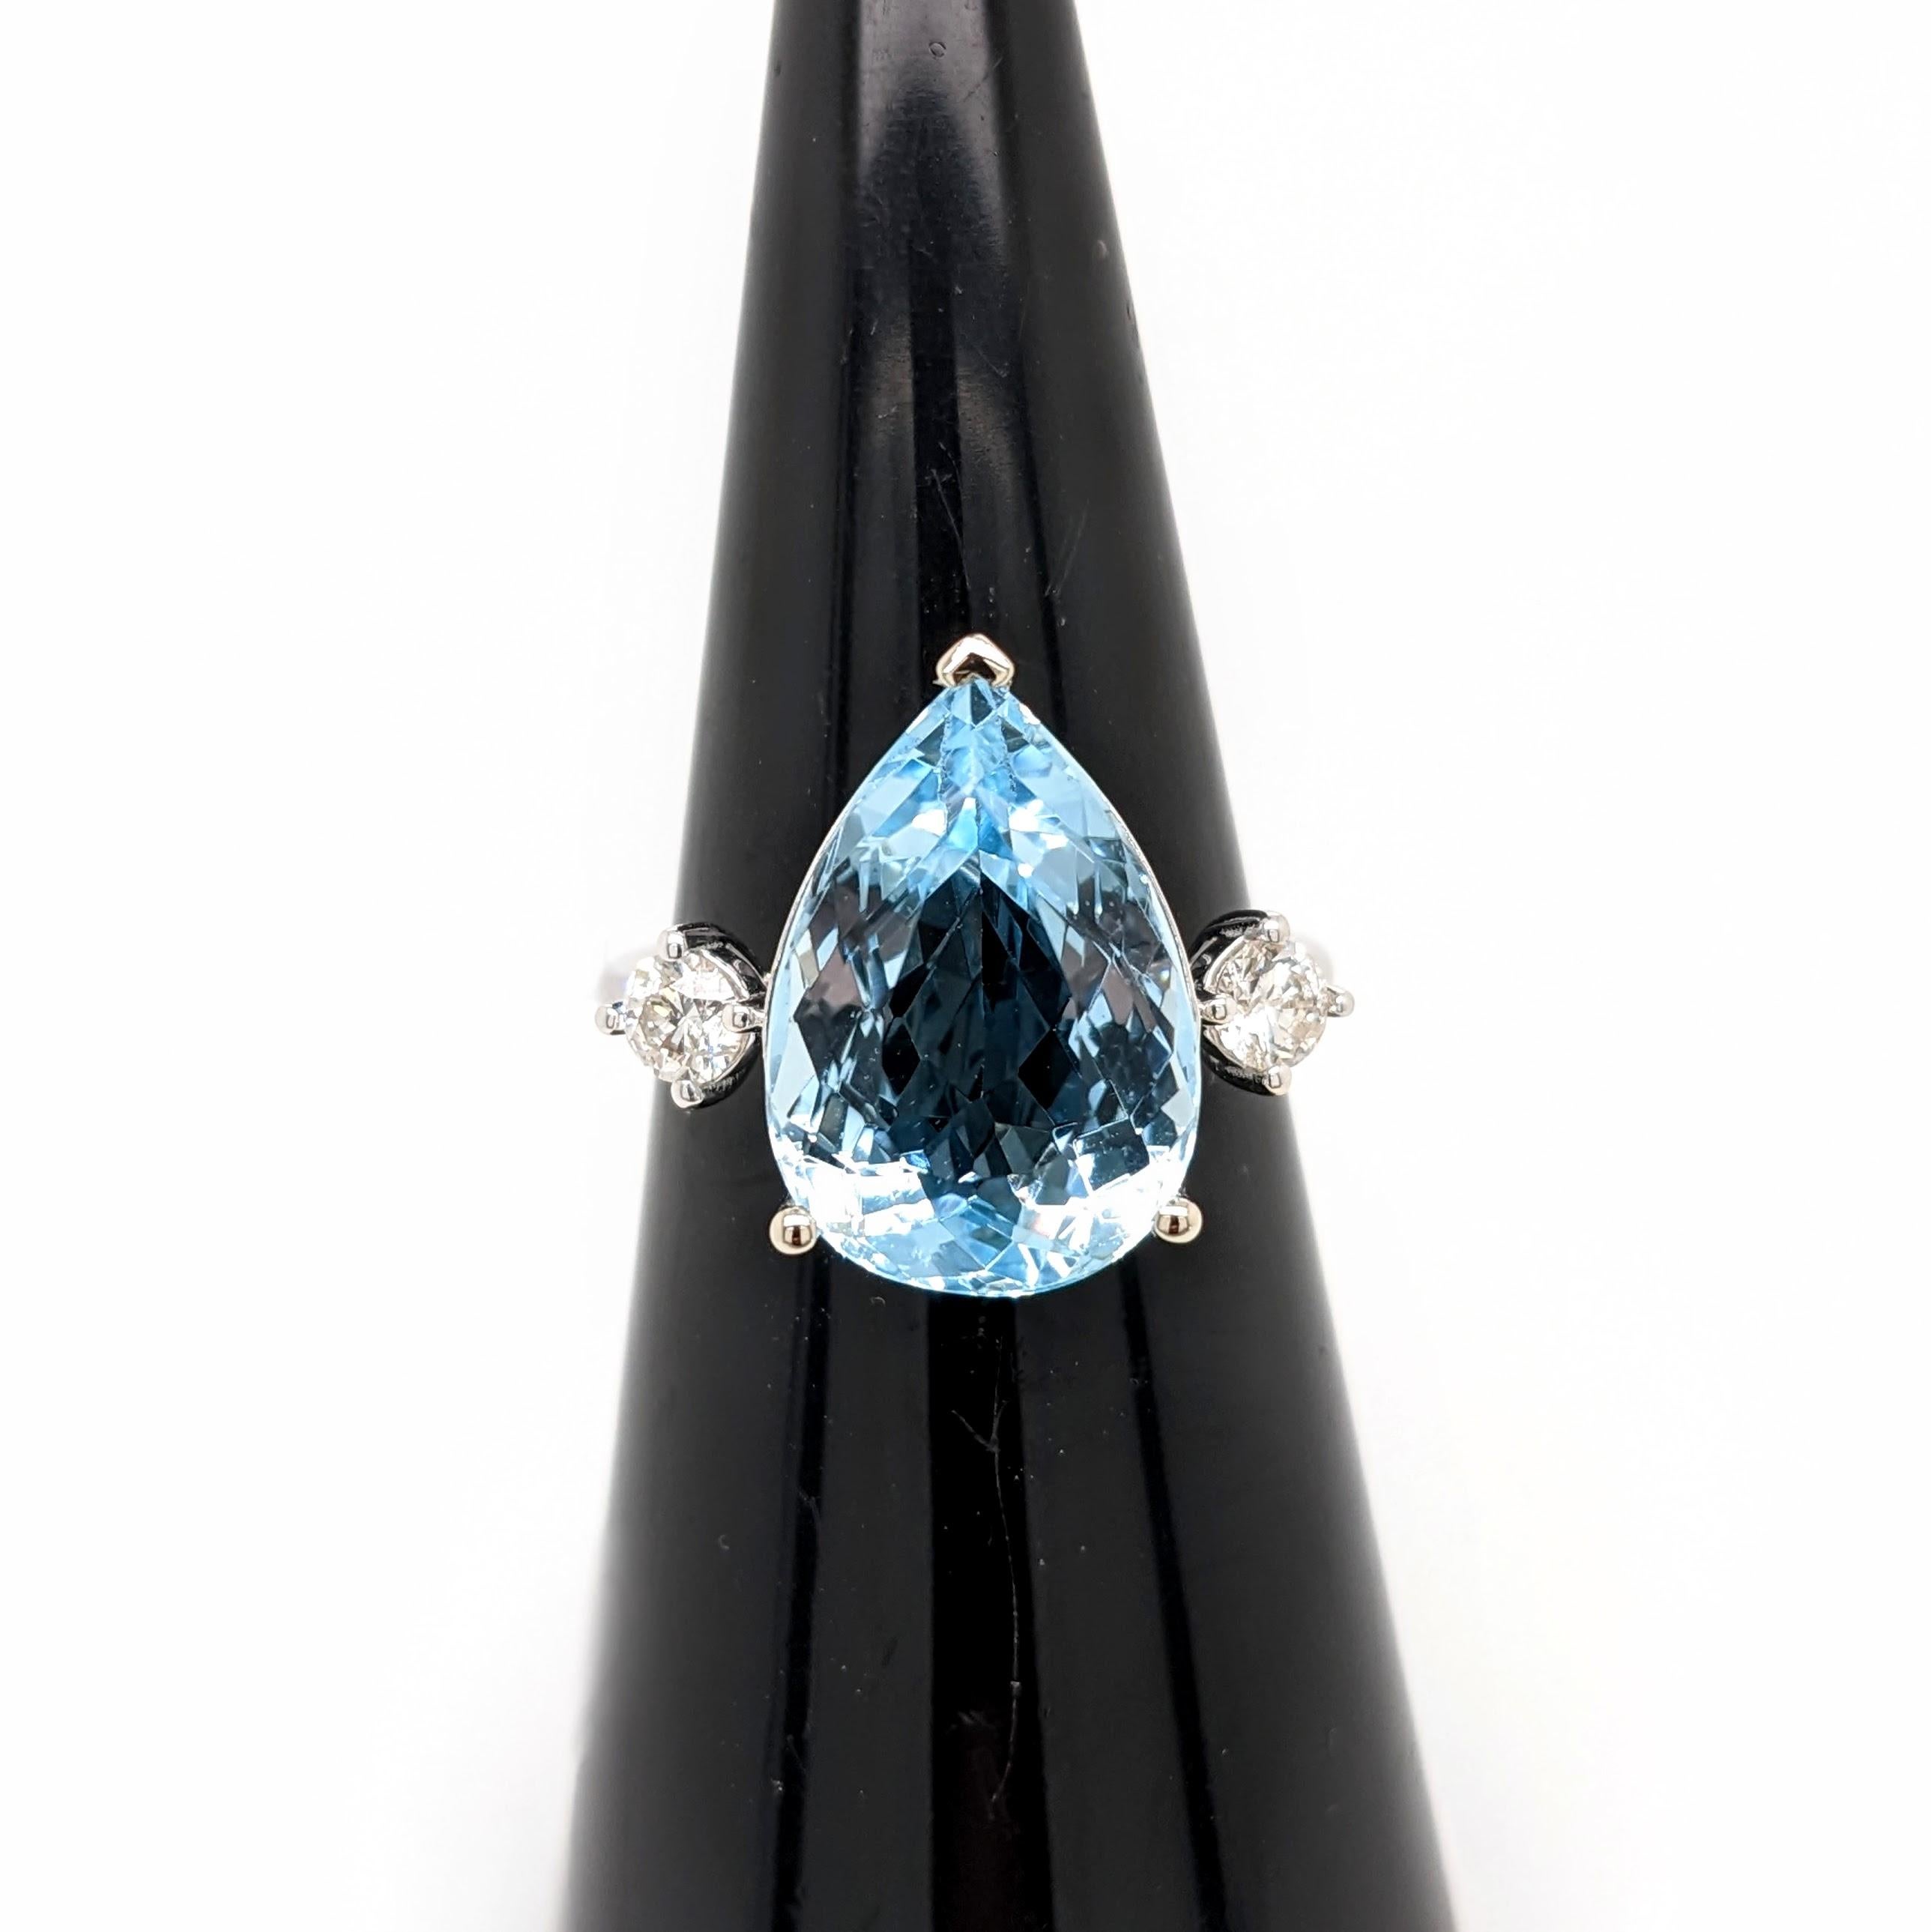 This beautiful ring features a teardrop sparkling Aquamarine in 14k white gold with natural diamond accents. A statement ring design perfect for an eye catching engagement or anniversary. This ring also makes a beautiful birthstone ring for your